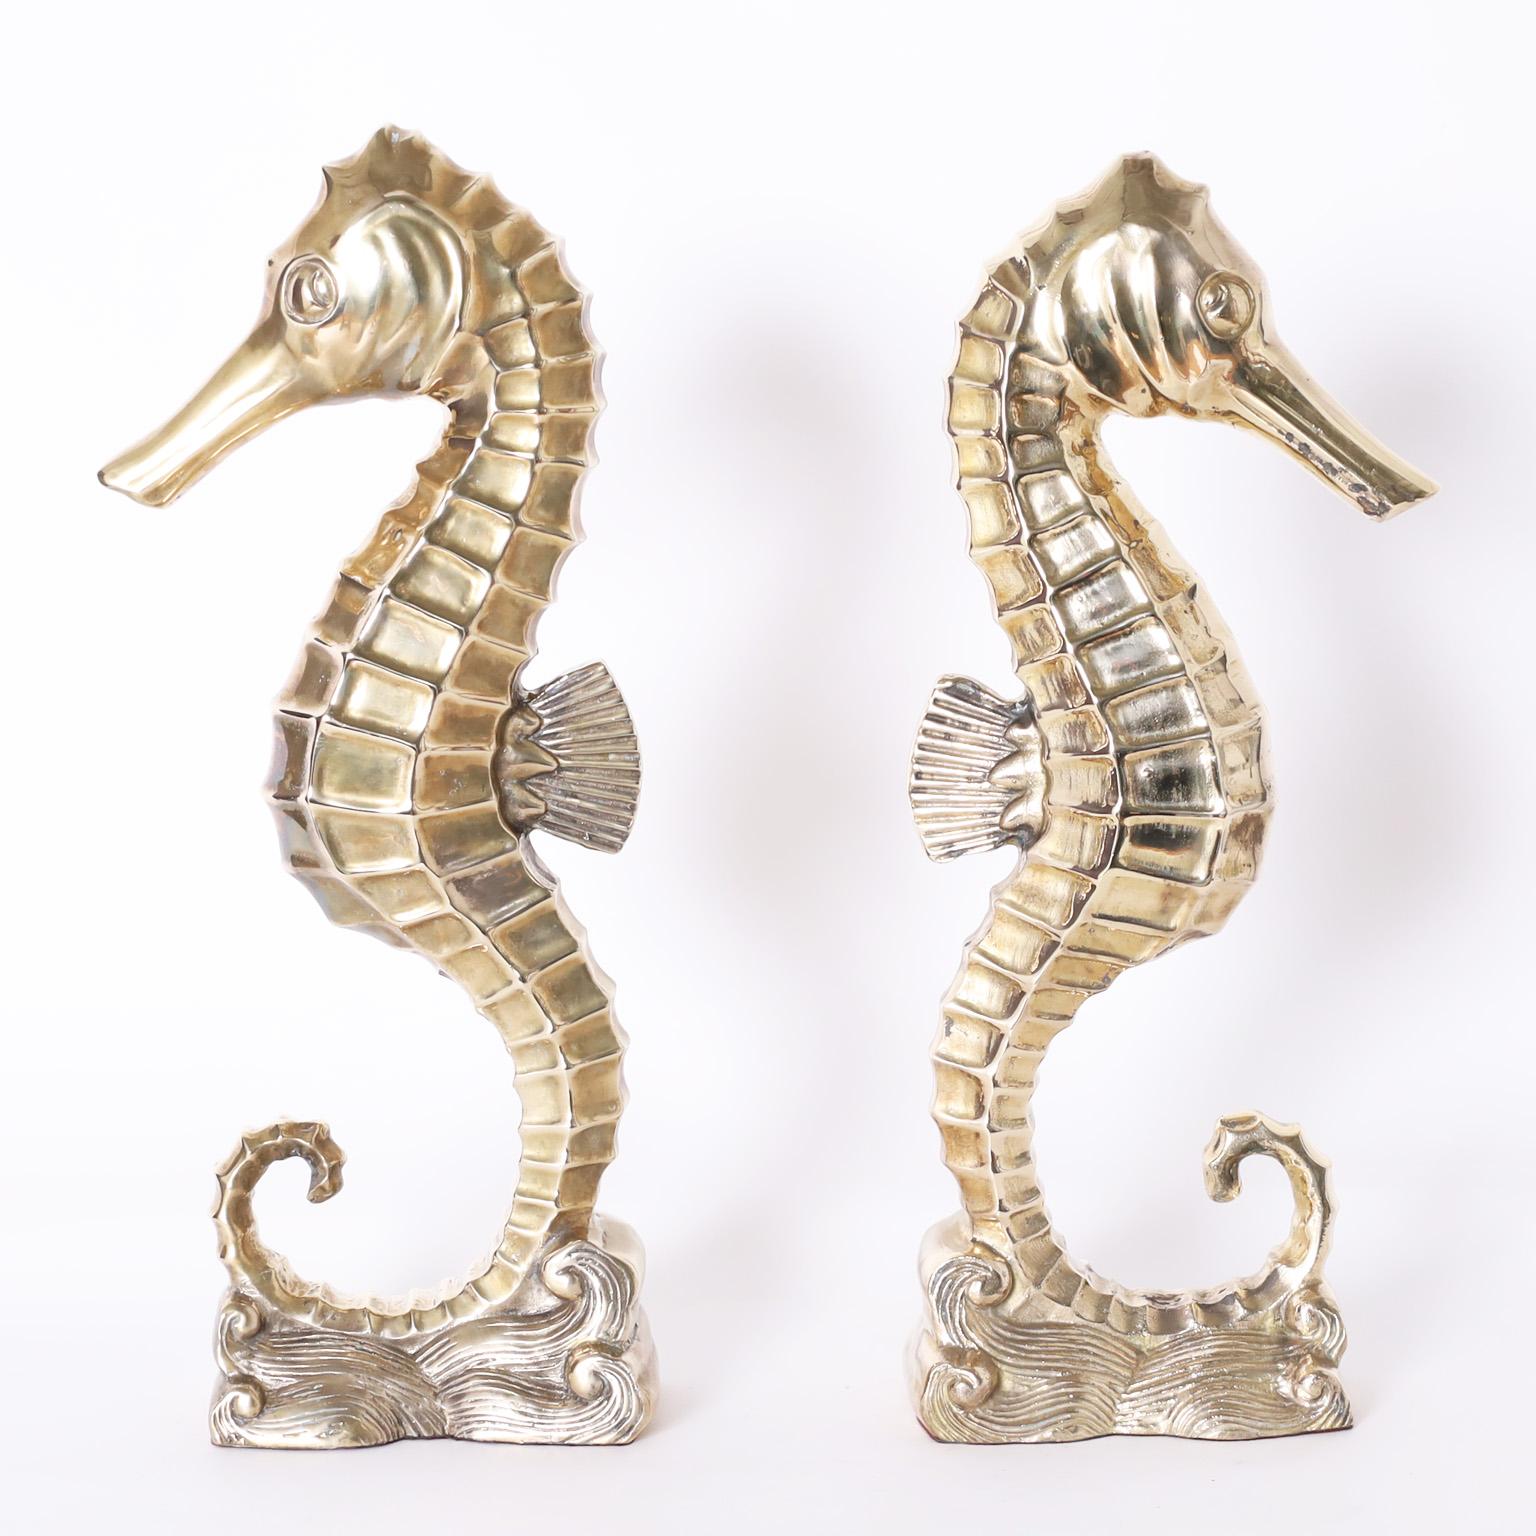 Cast Midcentury Brass Seahorse Sculptures, Priced Individually